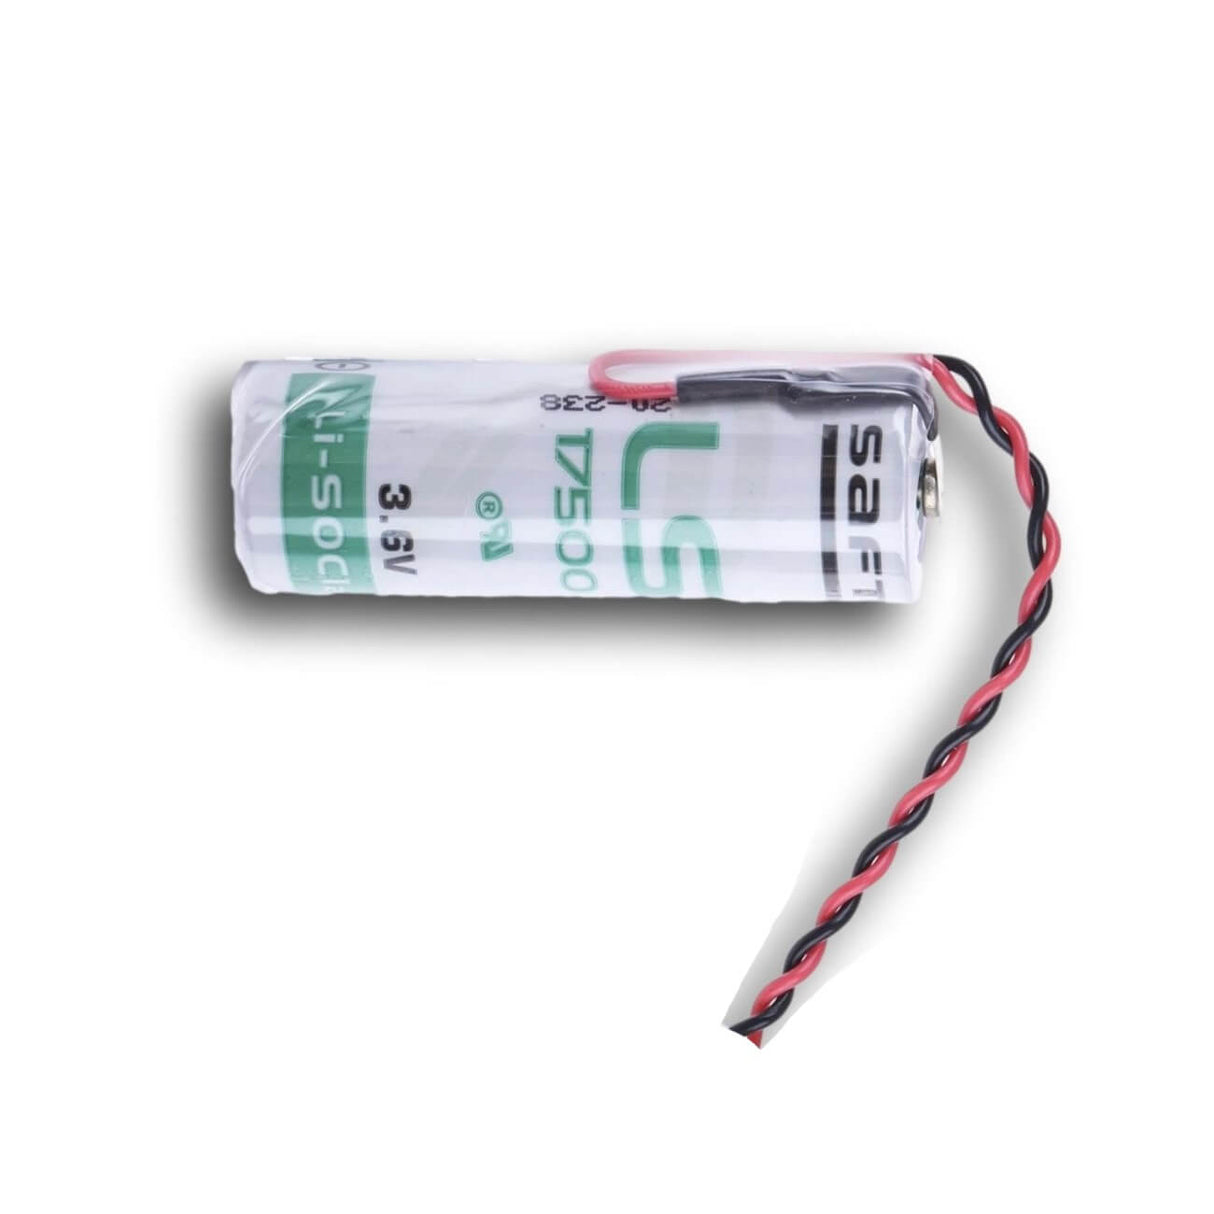 Saft Ls17500 A-size 3.6v 3600mah Battery With 3" Fly Leads Battery By Use Saft Lithium Batteries   